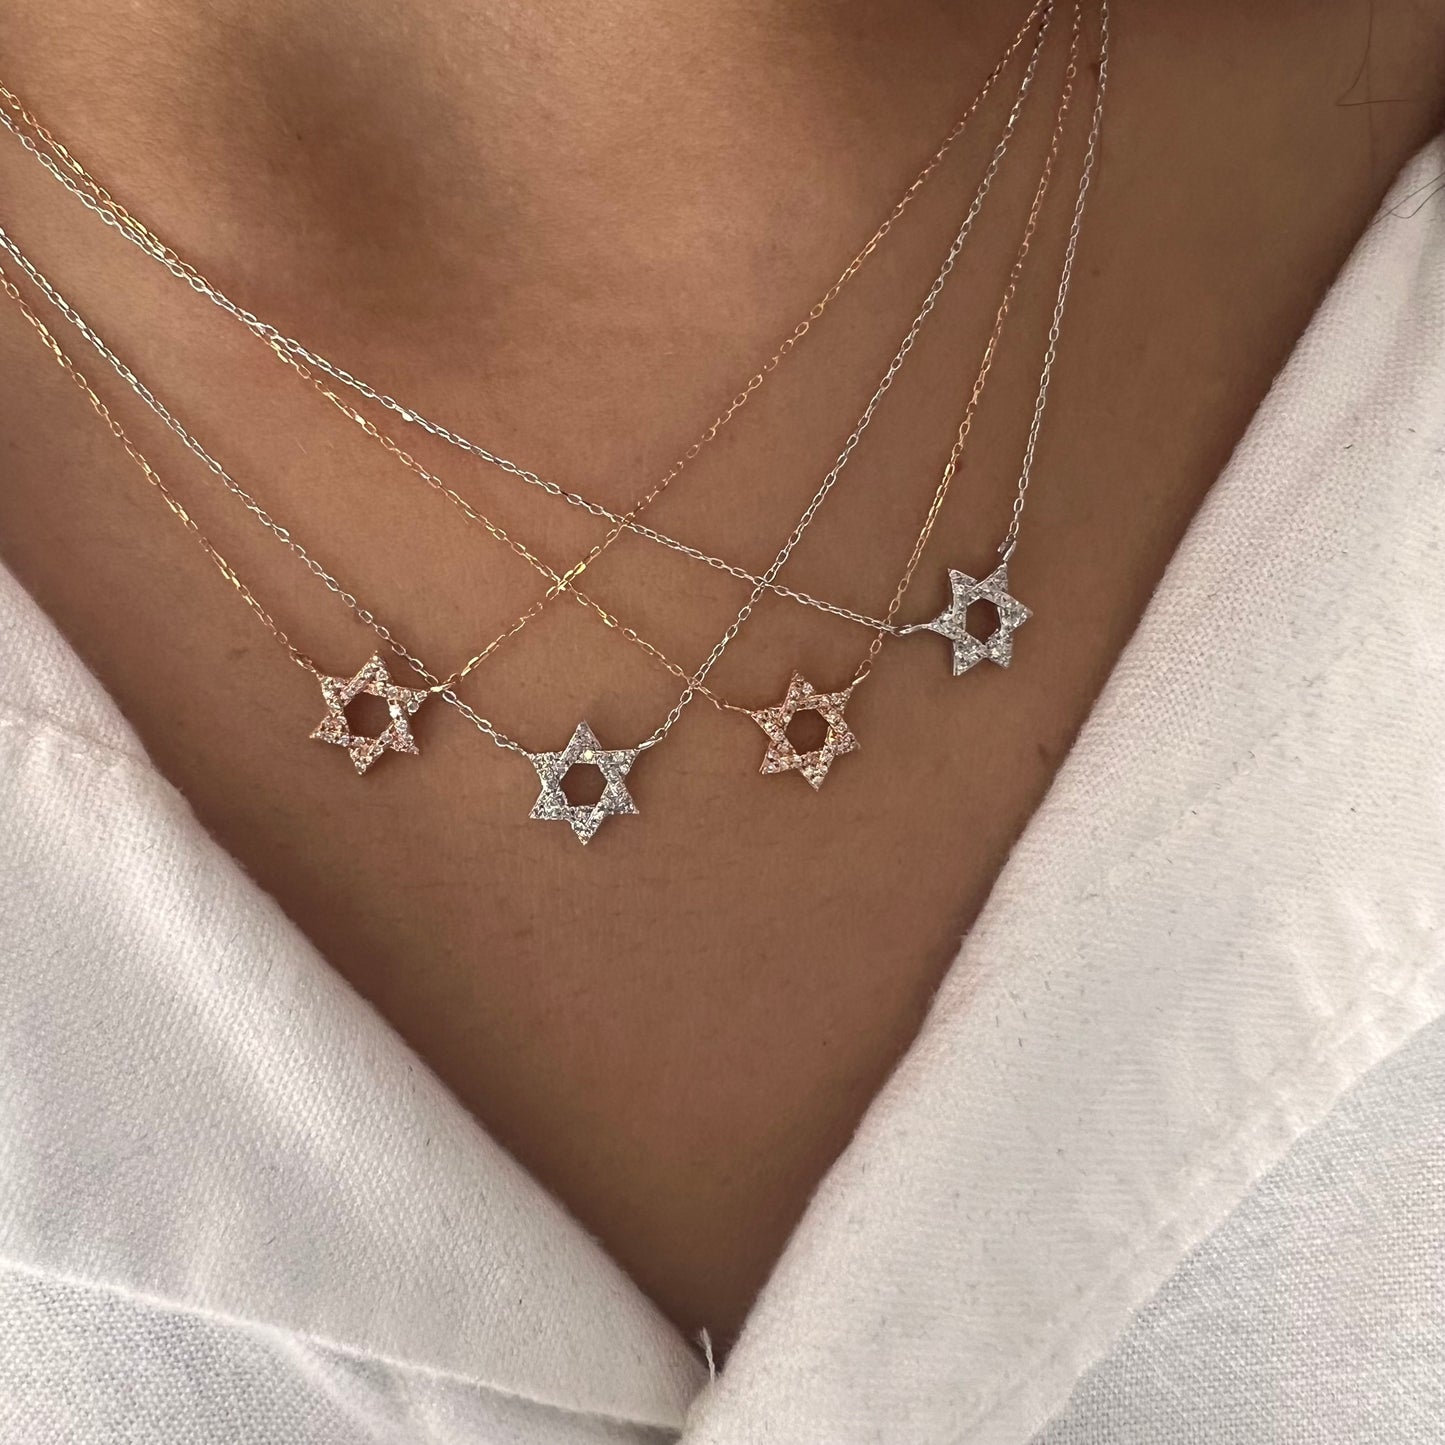 Star of David Necklace, Sterling Silver Magen David, Tiny Silver Star of  David Necklace, Silver Magen David Necklace, Evil Eye Necklace - Etsy |  Evil eye necklace, Eye necklace, Star necklace silver